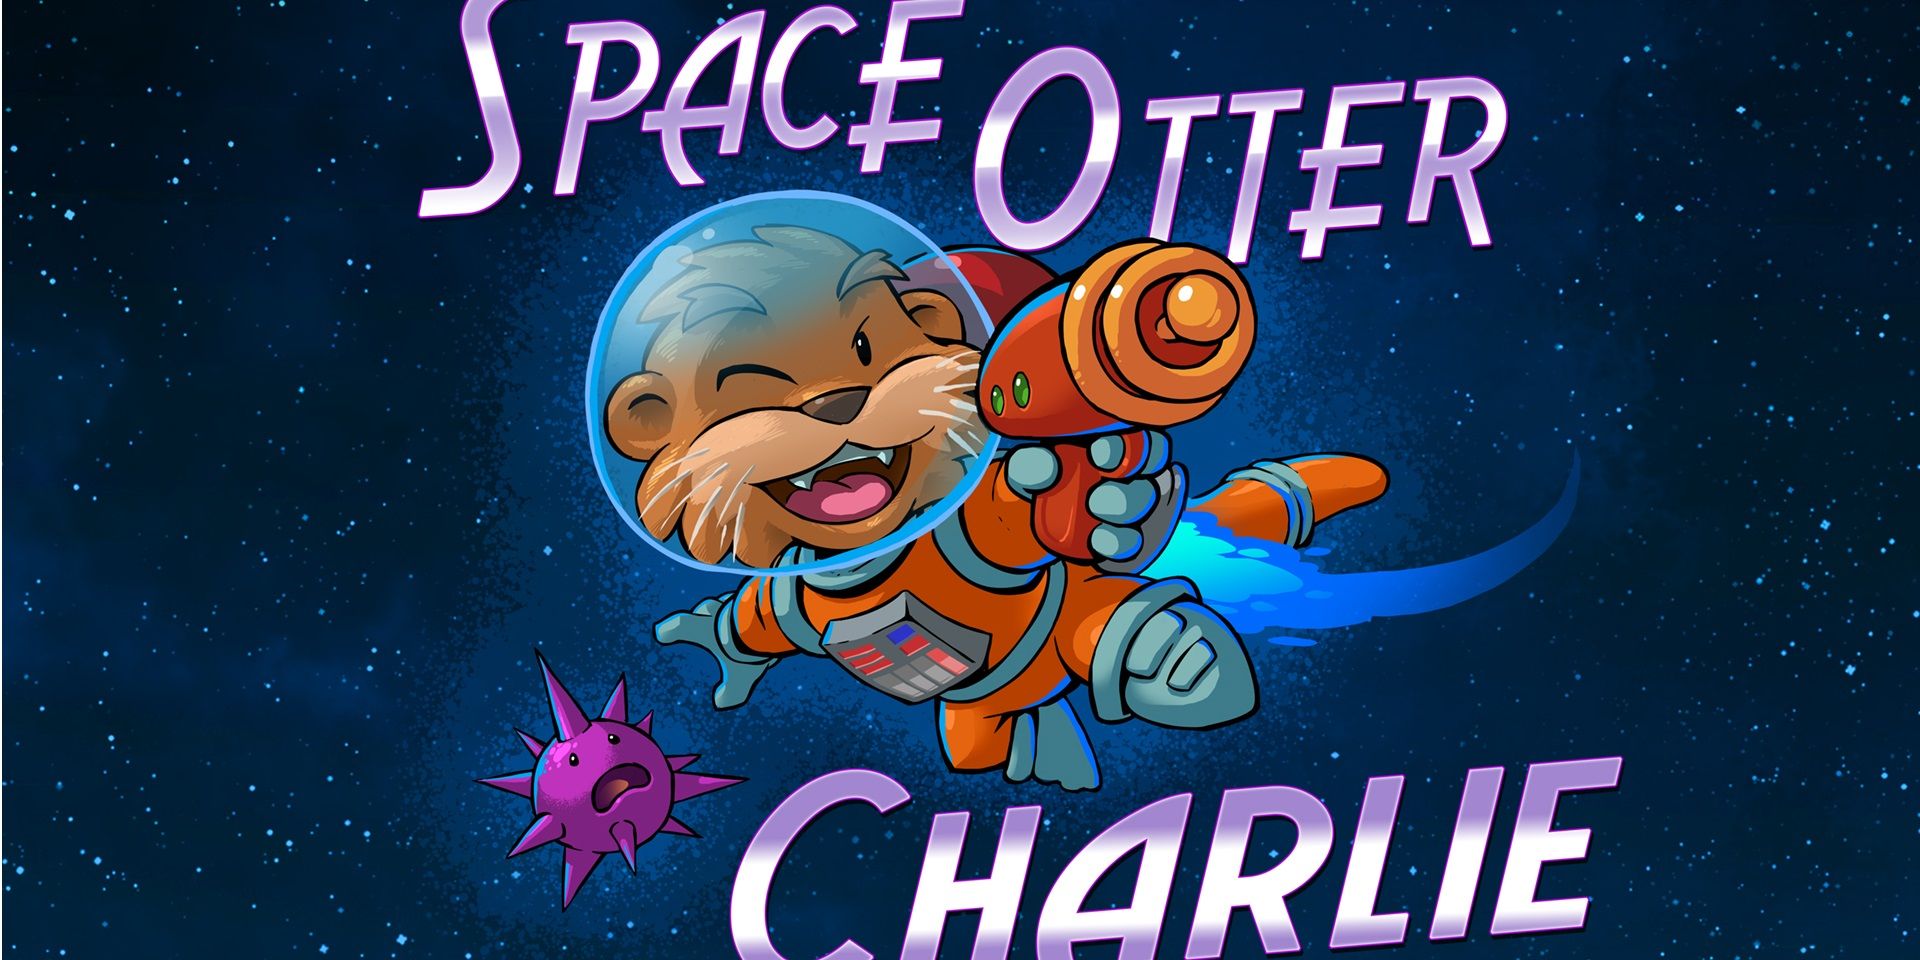 The Space Otter Charlie logo.